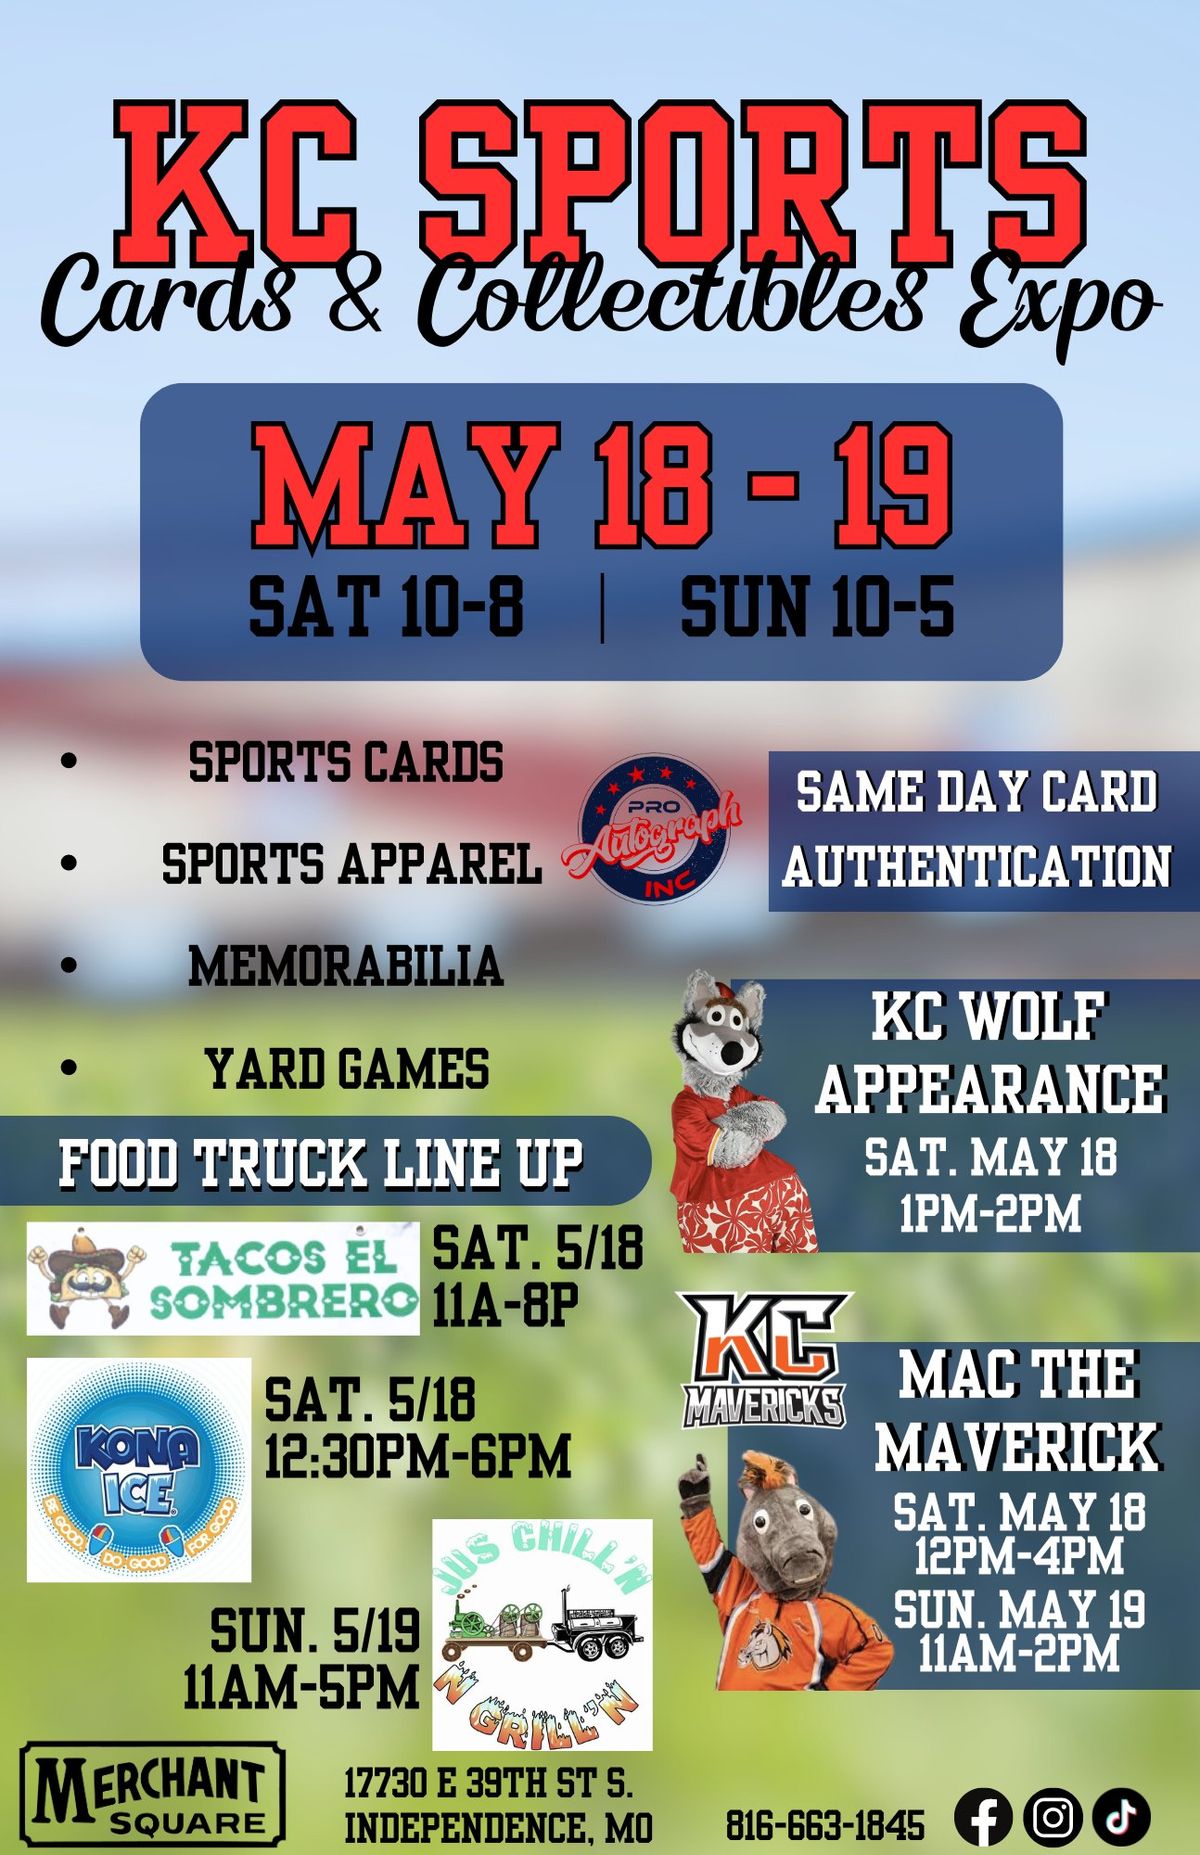 KC Sports Cards & Collectibles Expo - FREE ADMISSION FREE PARKING